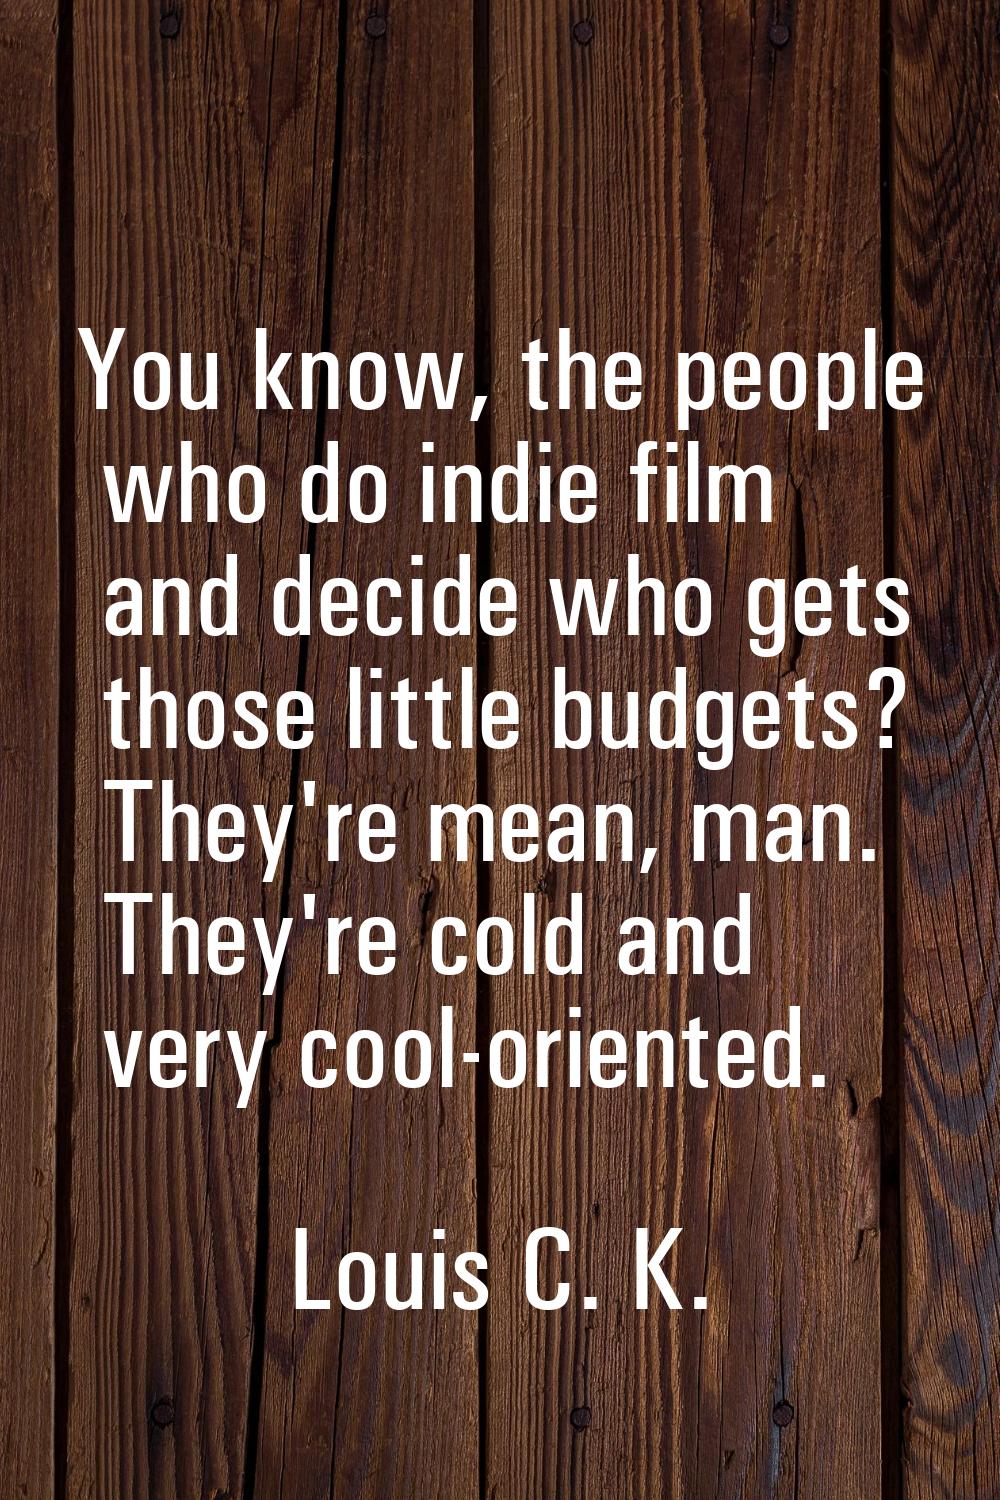 You know, the people who do indie film and decide who gets those little budgets? They're mean, man.